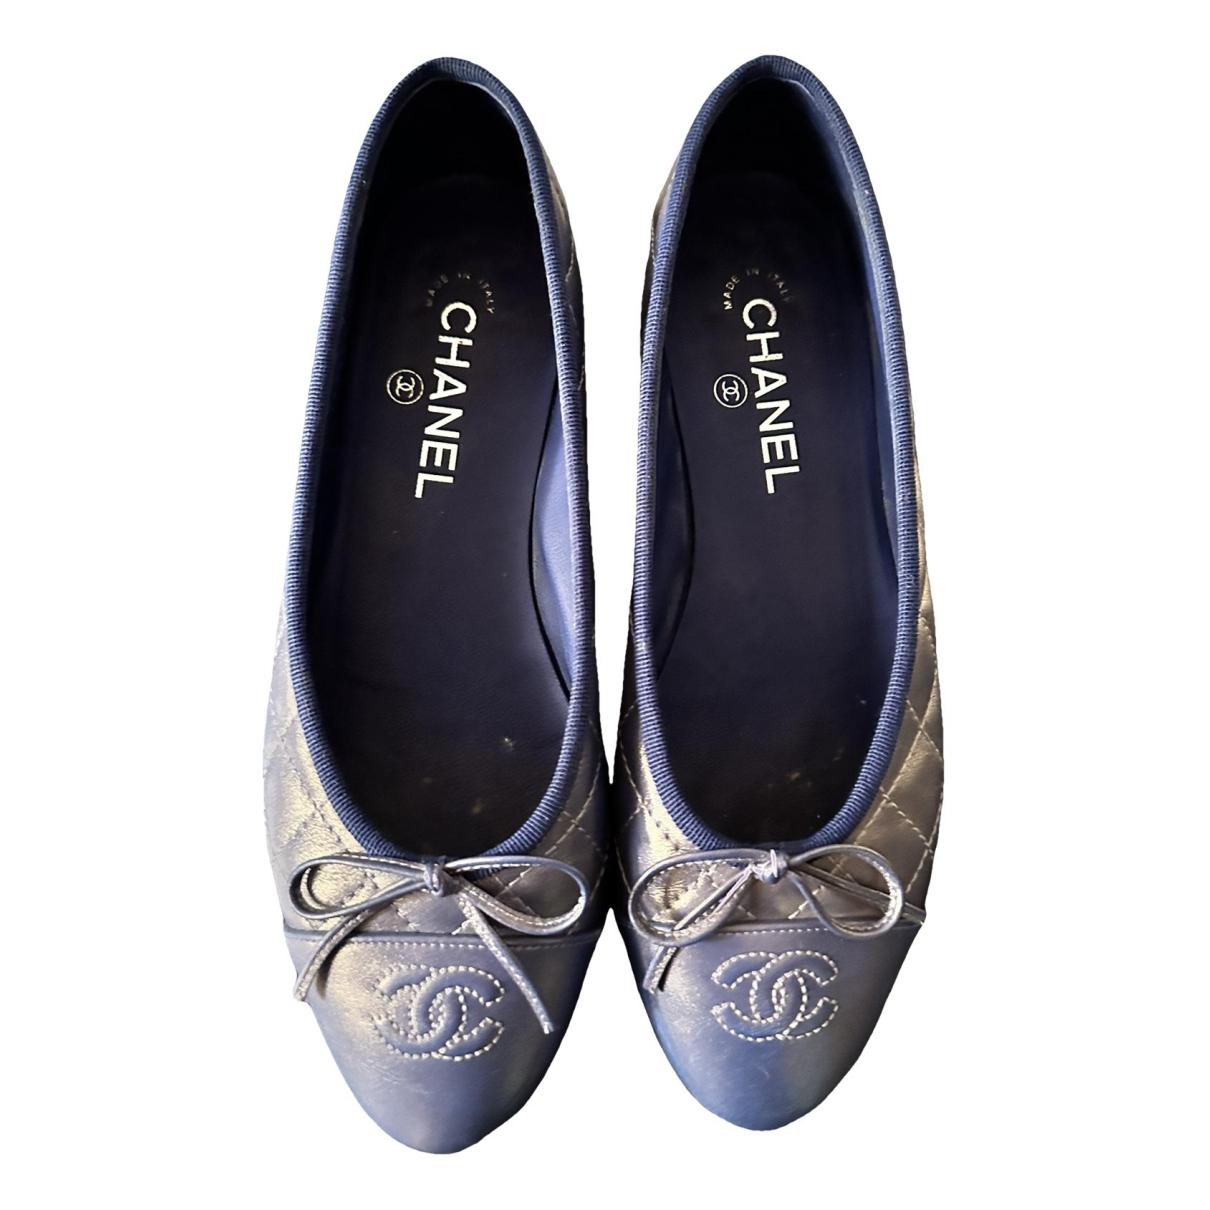 Chanel Tweed Classic Ballet Flat Shoes Sz 39.5 – Foxy Couture Carmel